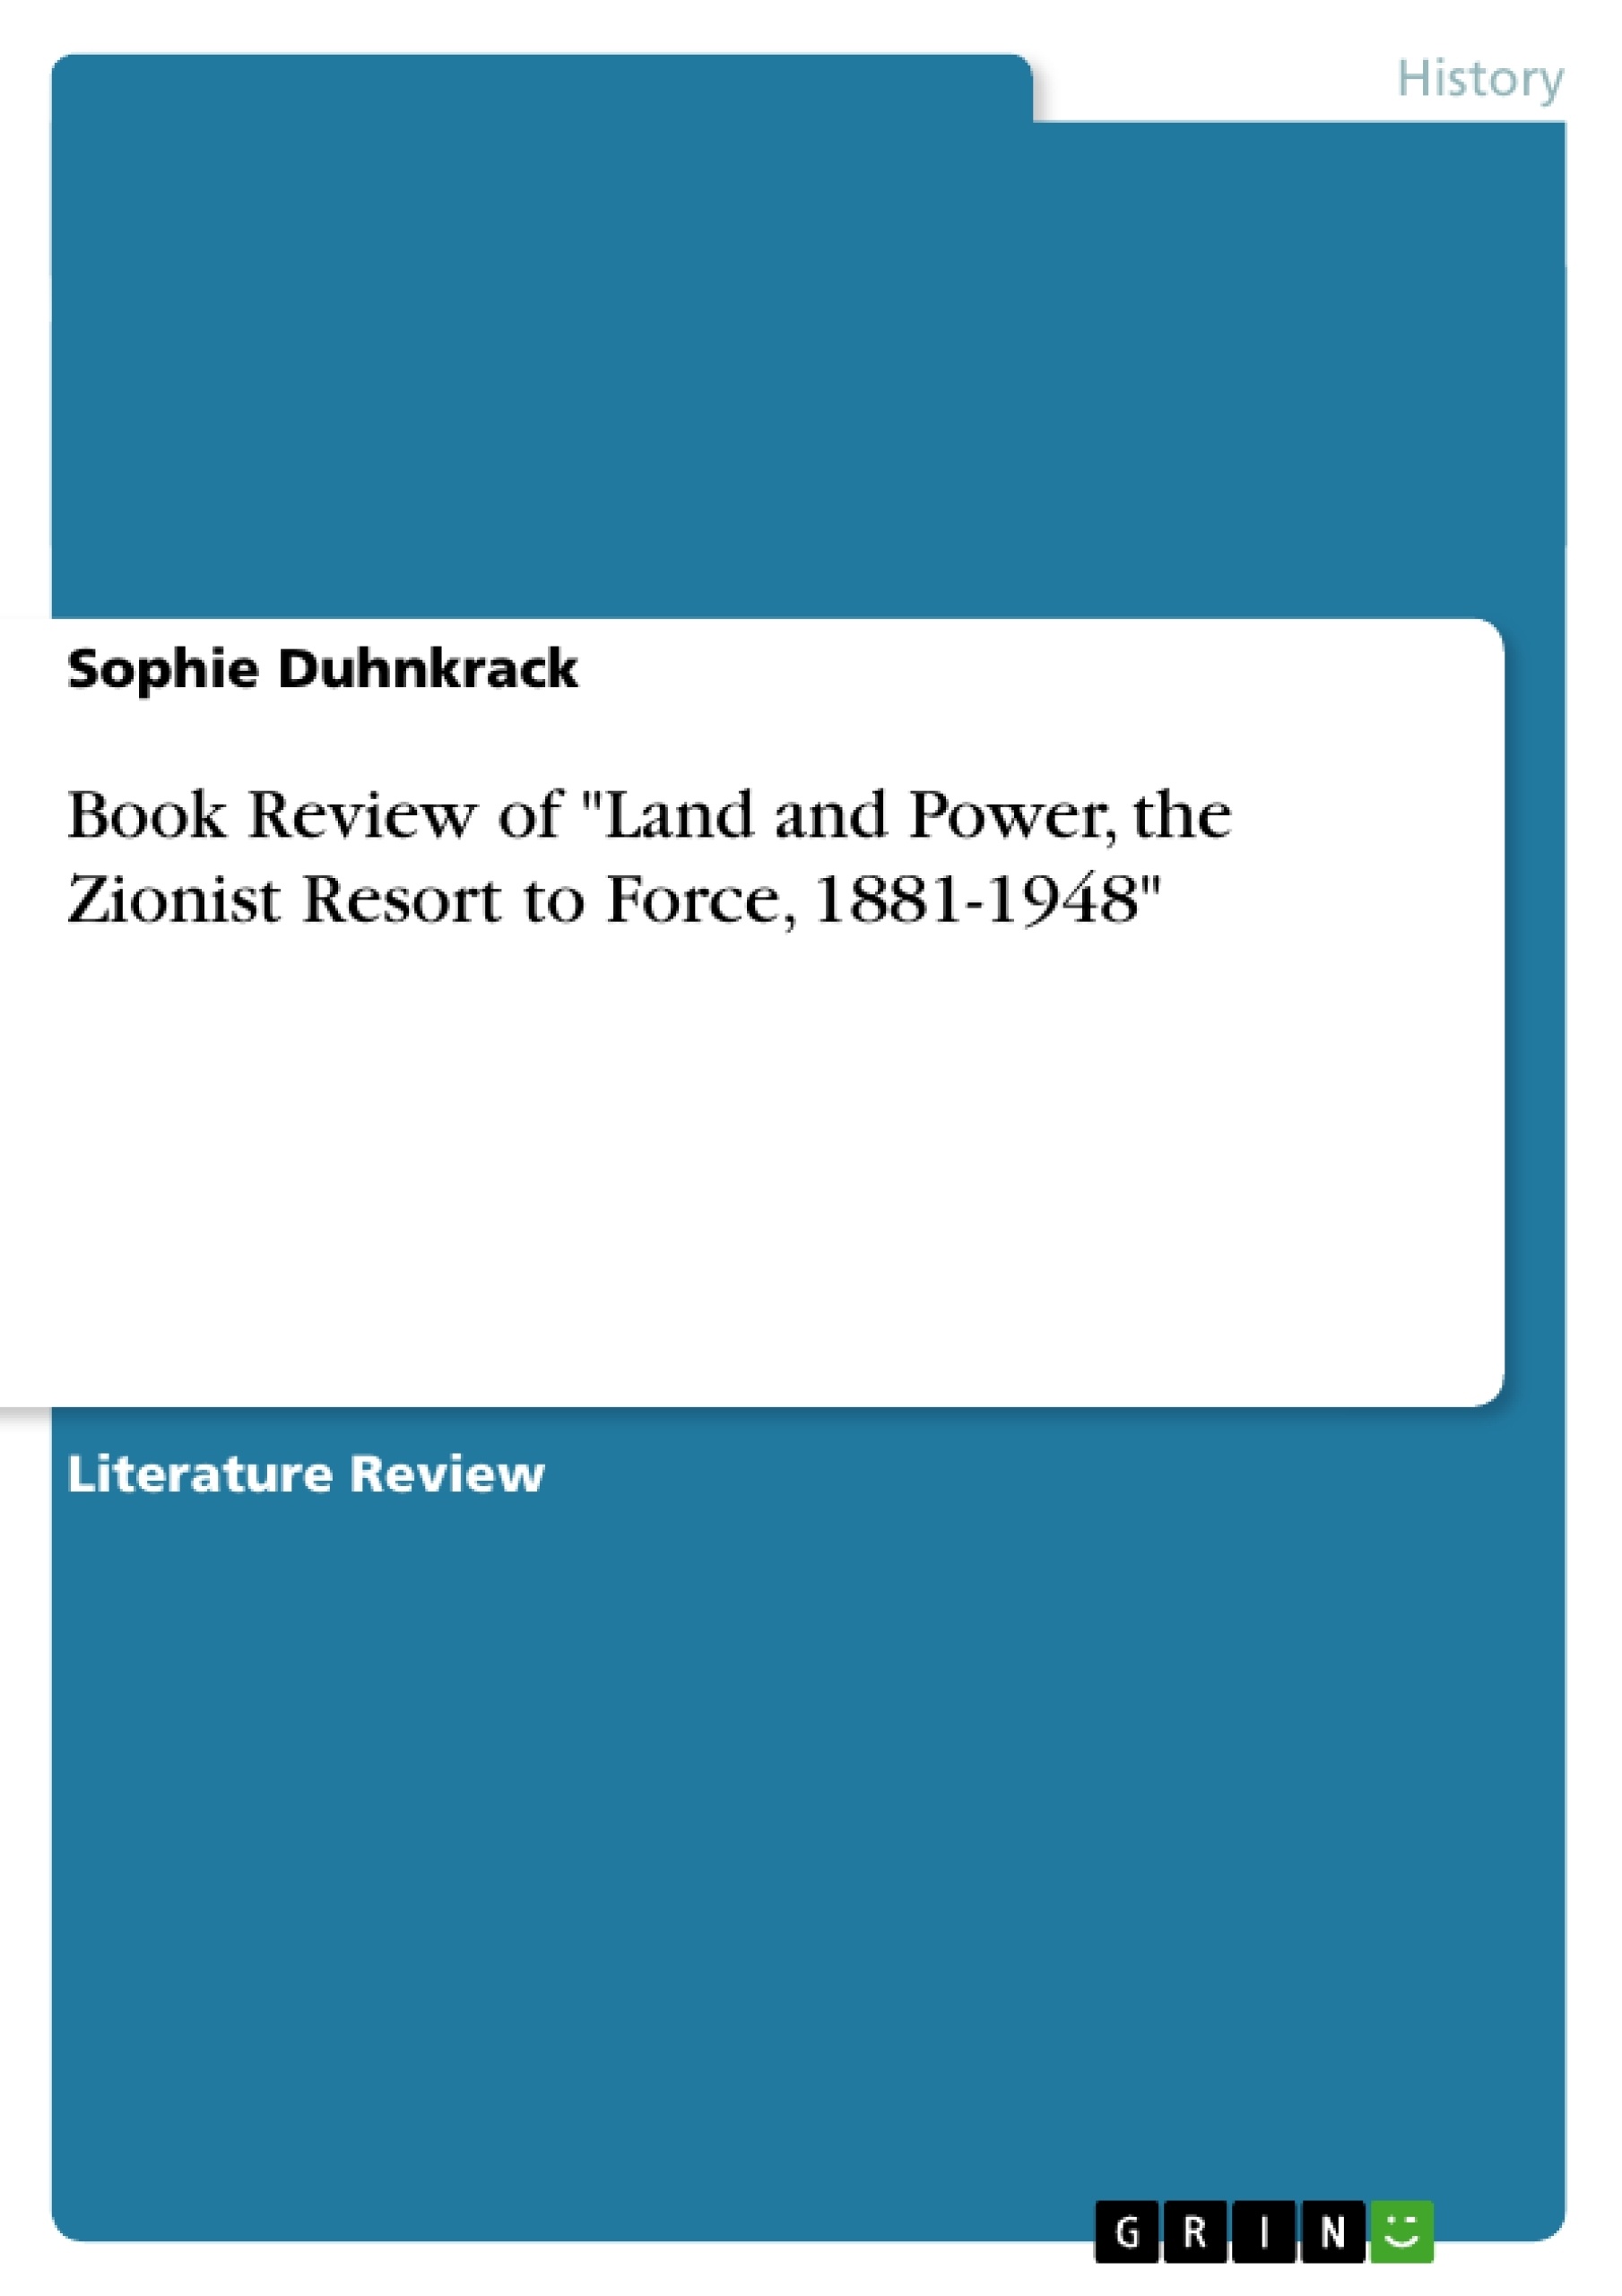 Title: Book Review of "Land and Power, the Zionist Resort to Force, 1881-1948"